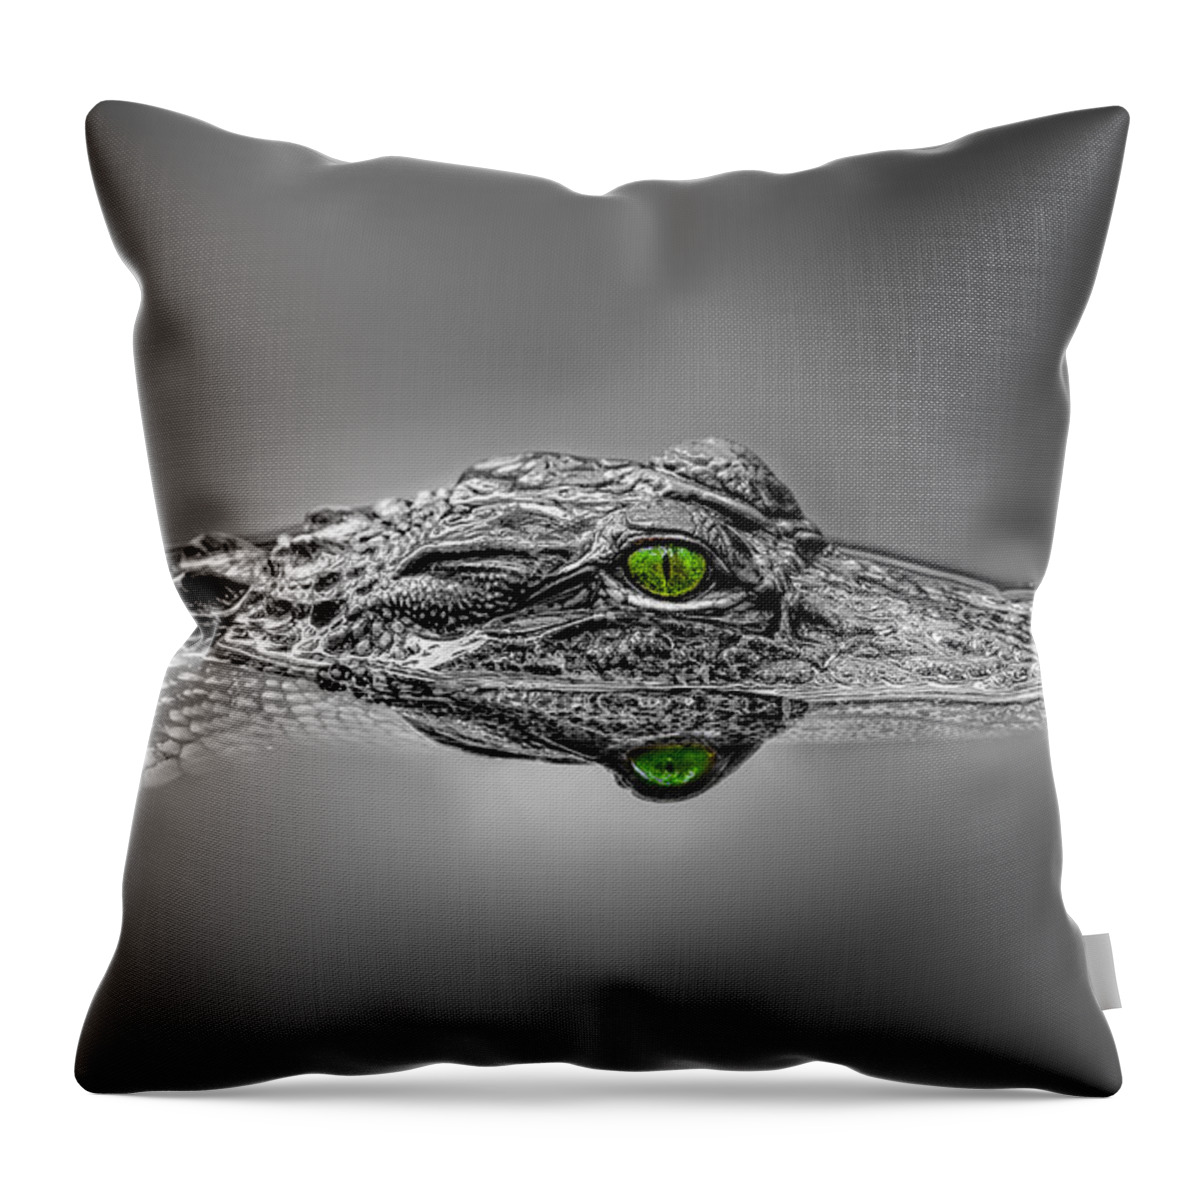 Aggression Throw Pillow featuring the photograph Alligator by Peter Lakomy